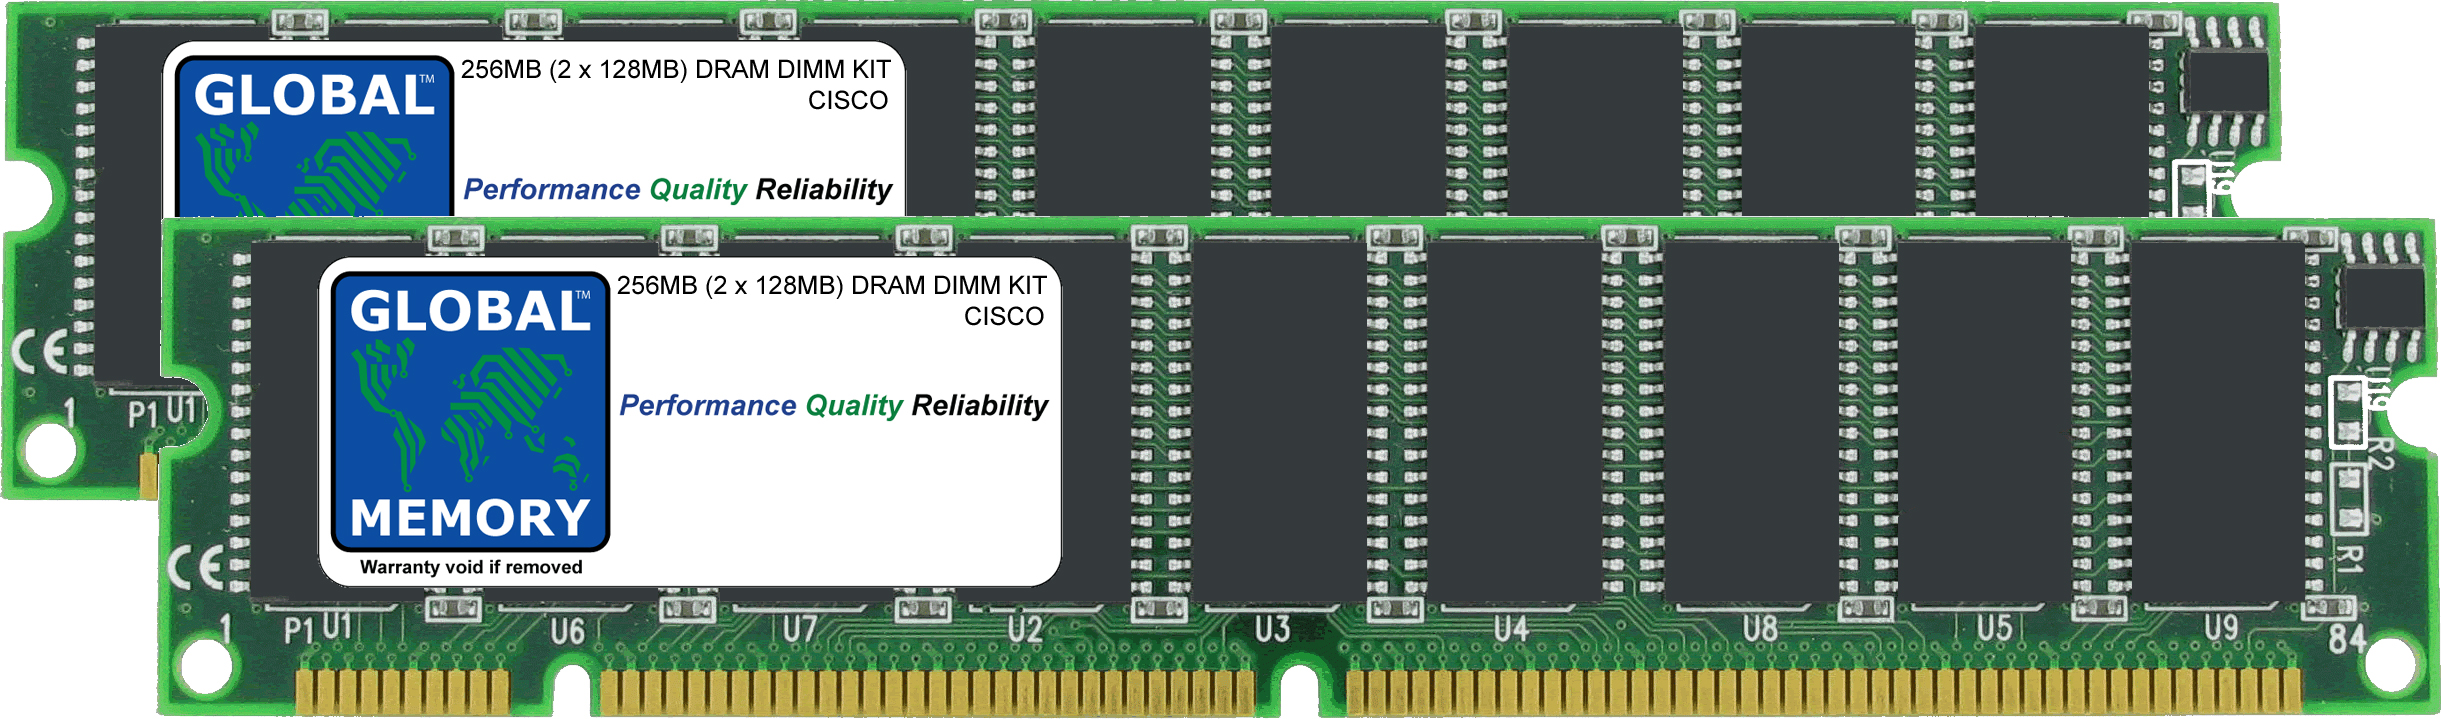 256MB (2 x 128MB) DRAM DIMM MEMORY RAM KIT FOR CISCO 7500 SERIES ROUTERS ROUTE SWITCH PROCESSOR 8 (MEM-RSP8-256M) - Click Image to Close